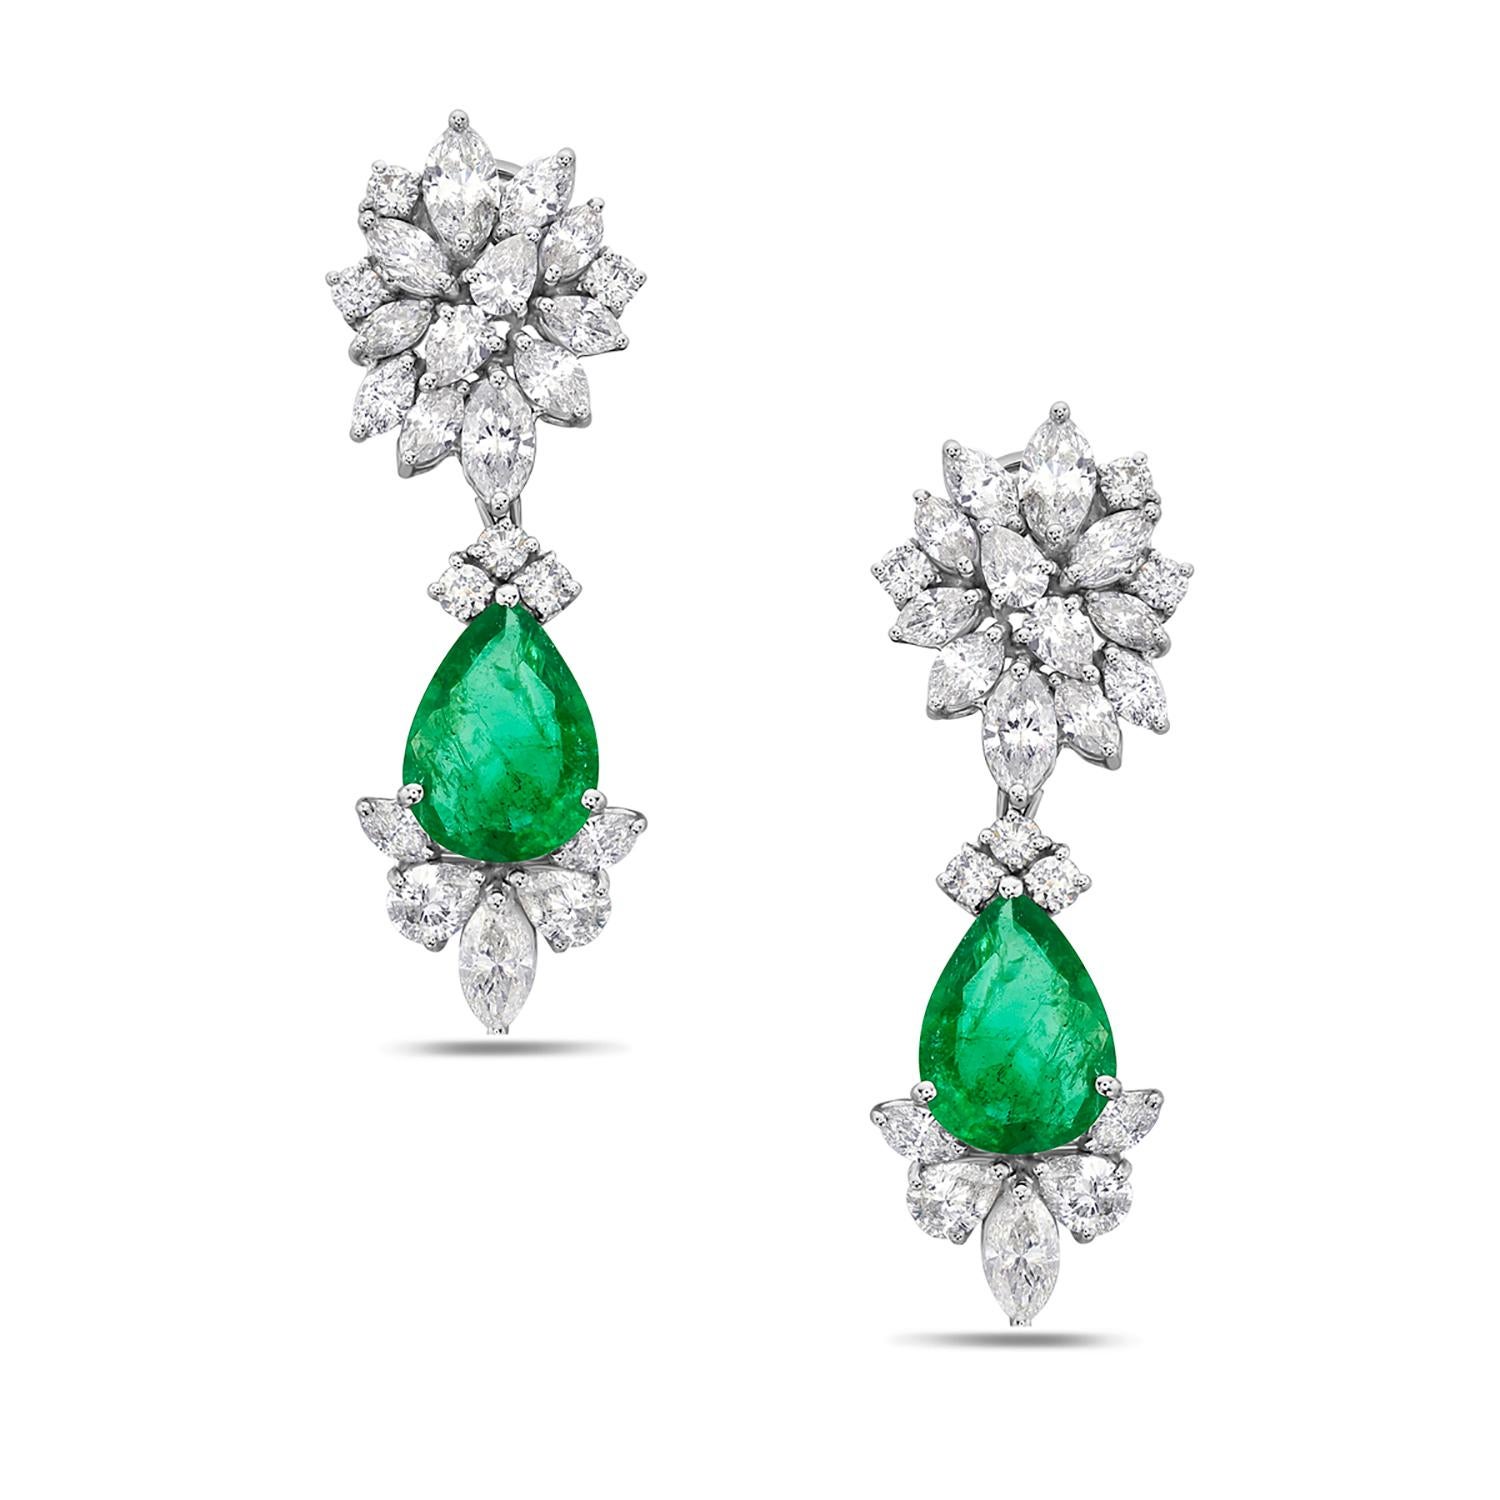 Starburst Earrings With Zambian Emerald Accented With Diamonds In 18k White Gold In New Condition For Sale In New York, NY